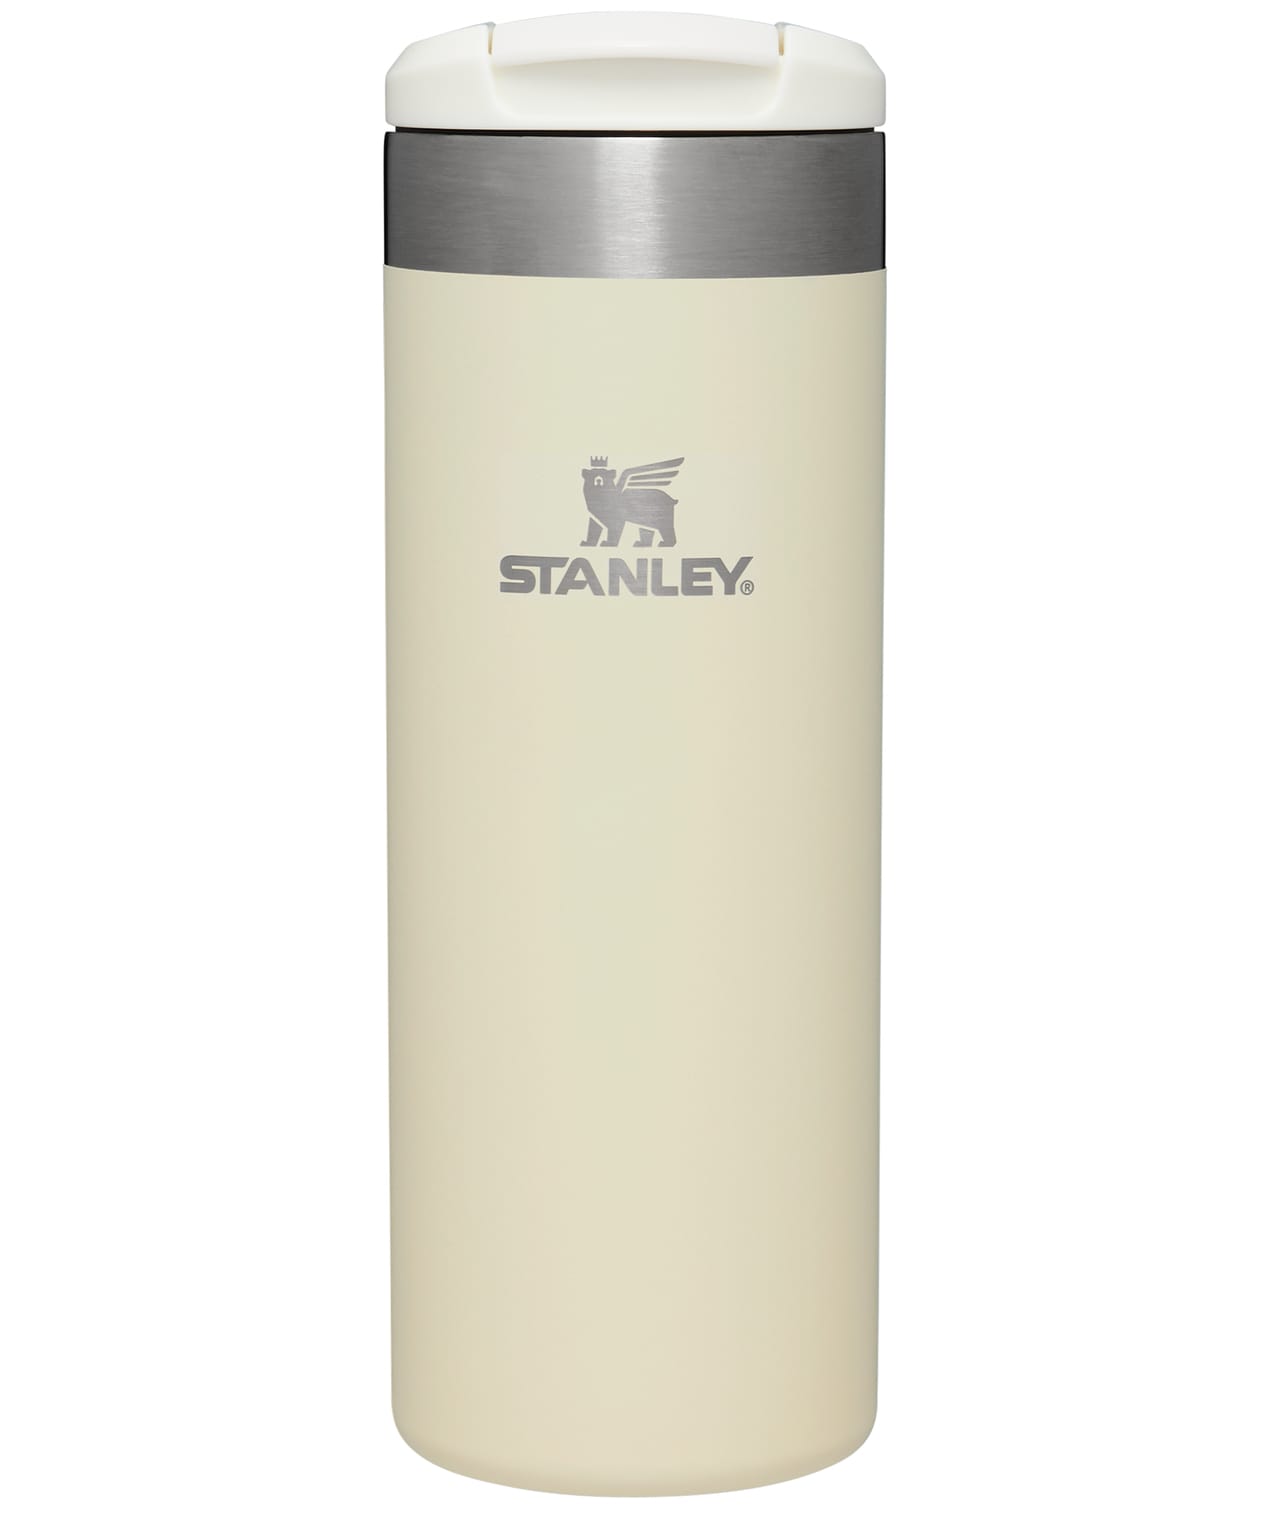 Stanley Quencher H2.0 FlowState Stainless Steel Vacuum Insulated Tumbler 40  oz - Drinksholic